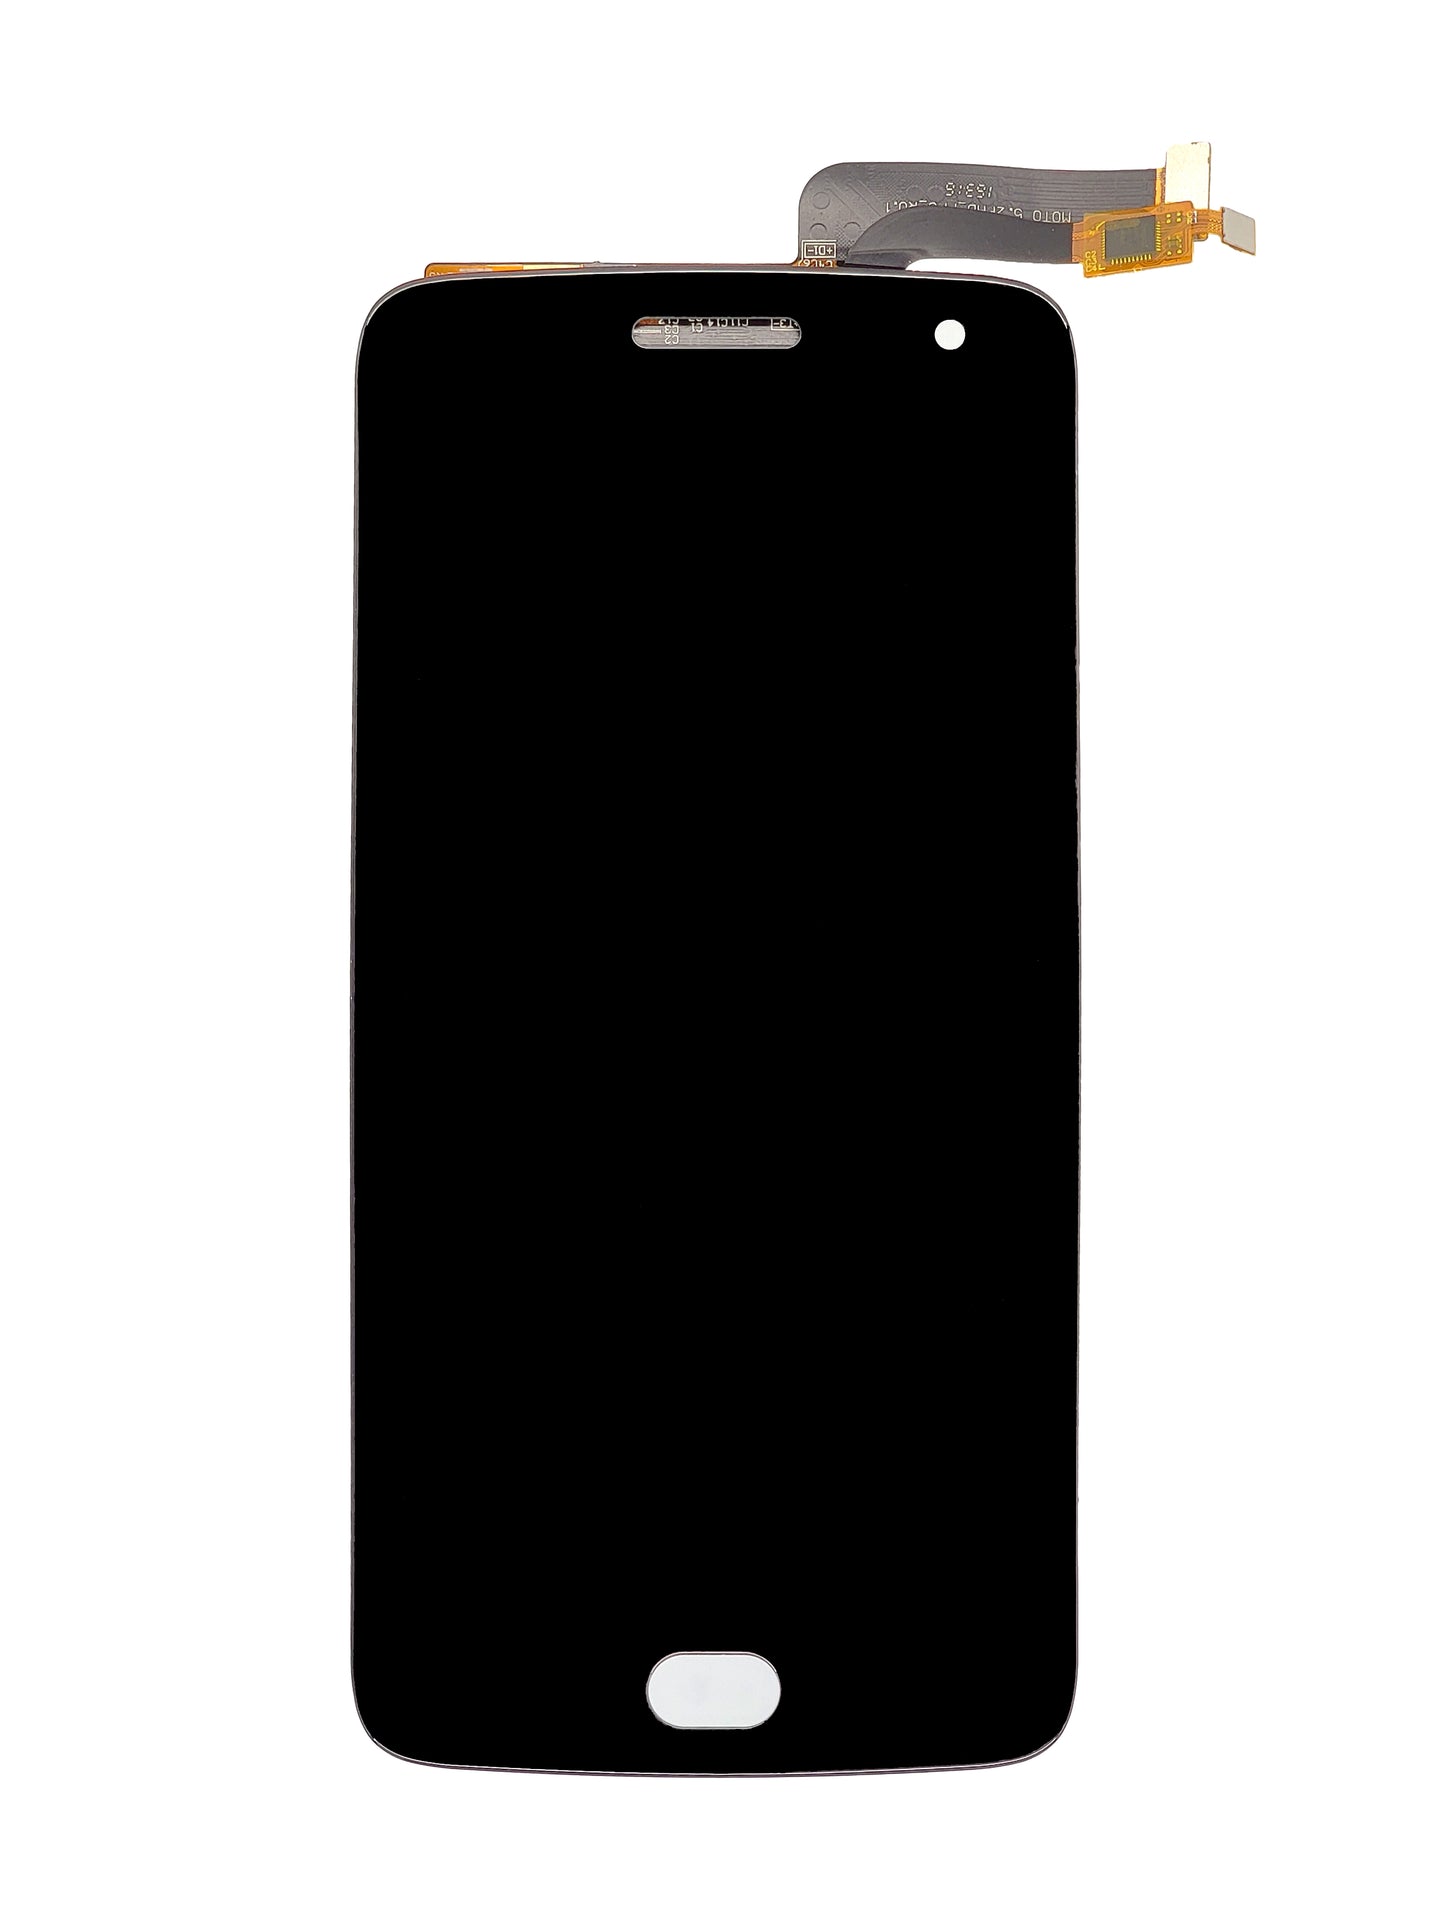 Moto G5 Plus (XT1644) Screen Assembly (Without The Frame) (Refurbished) (Black)